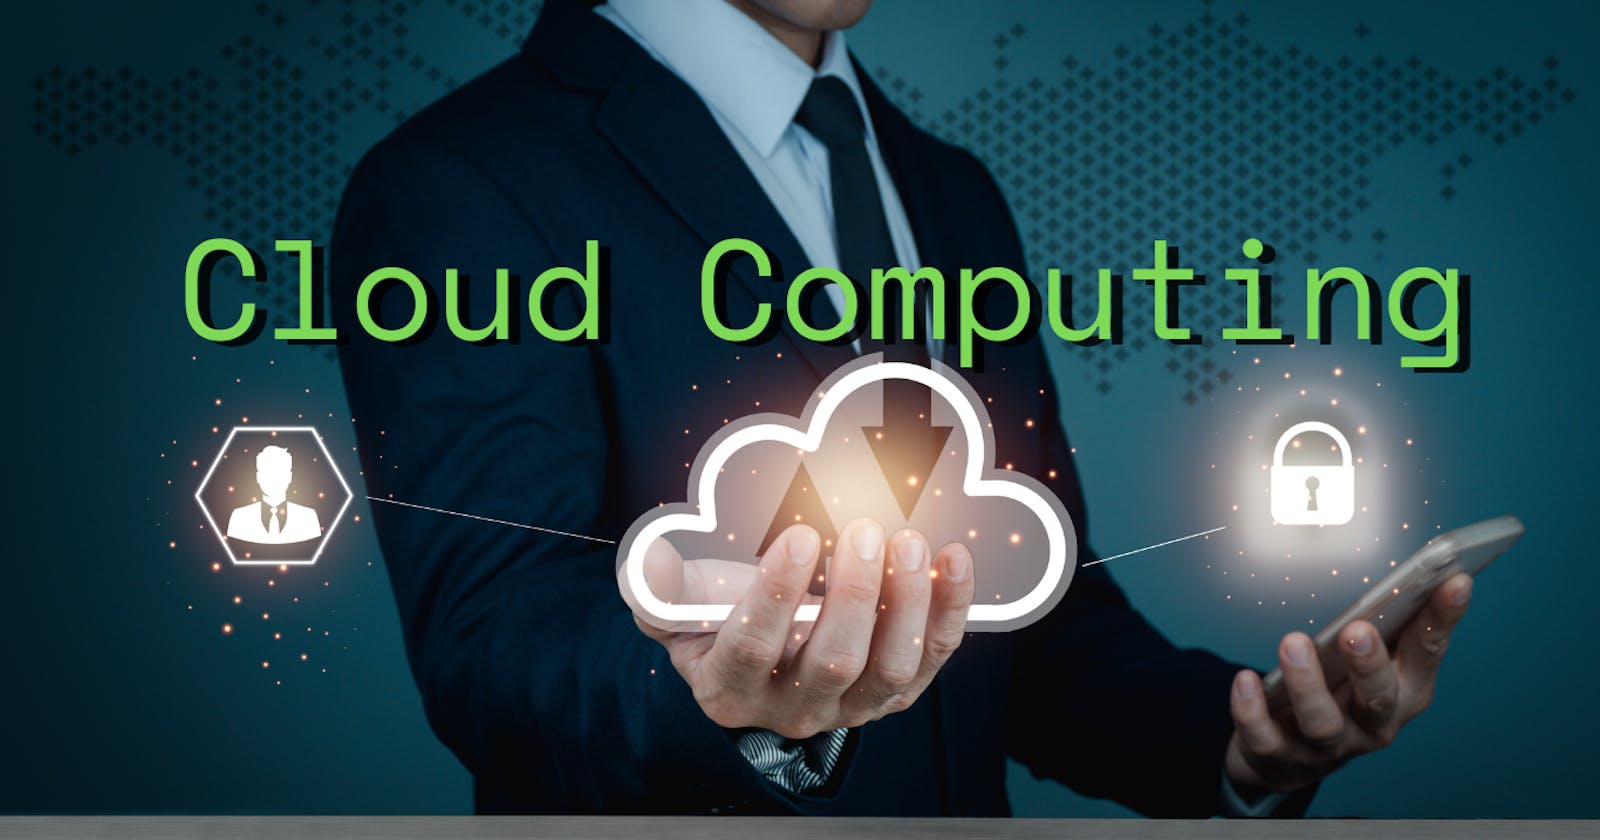 Getting Started With Cloud Computing